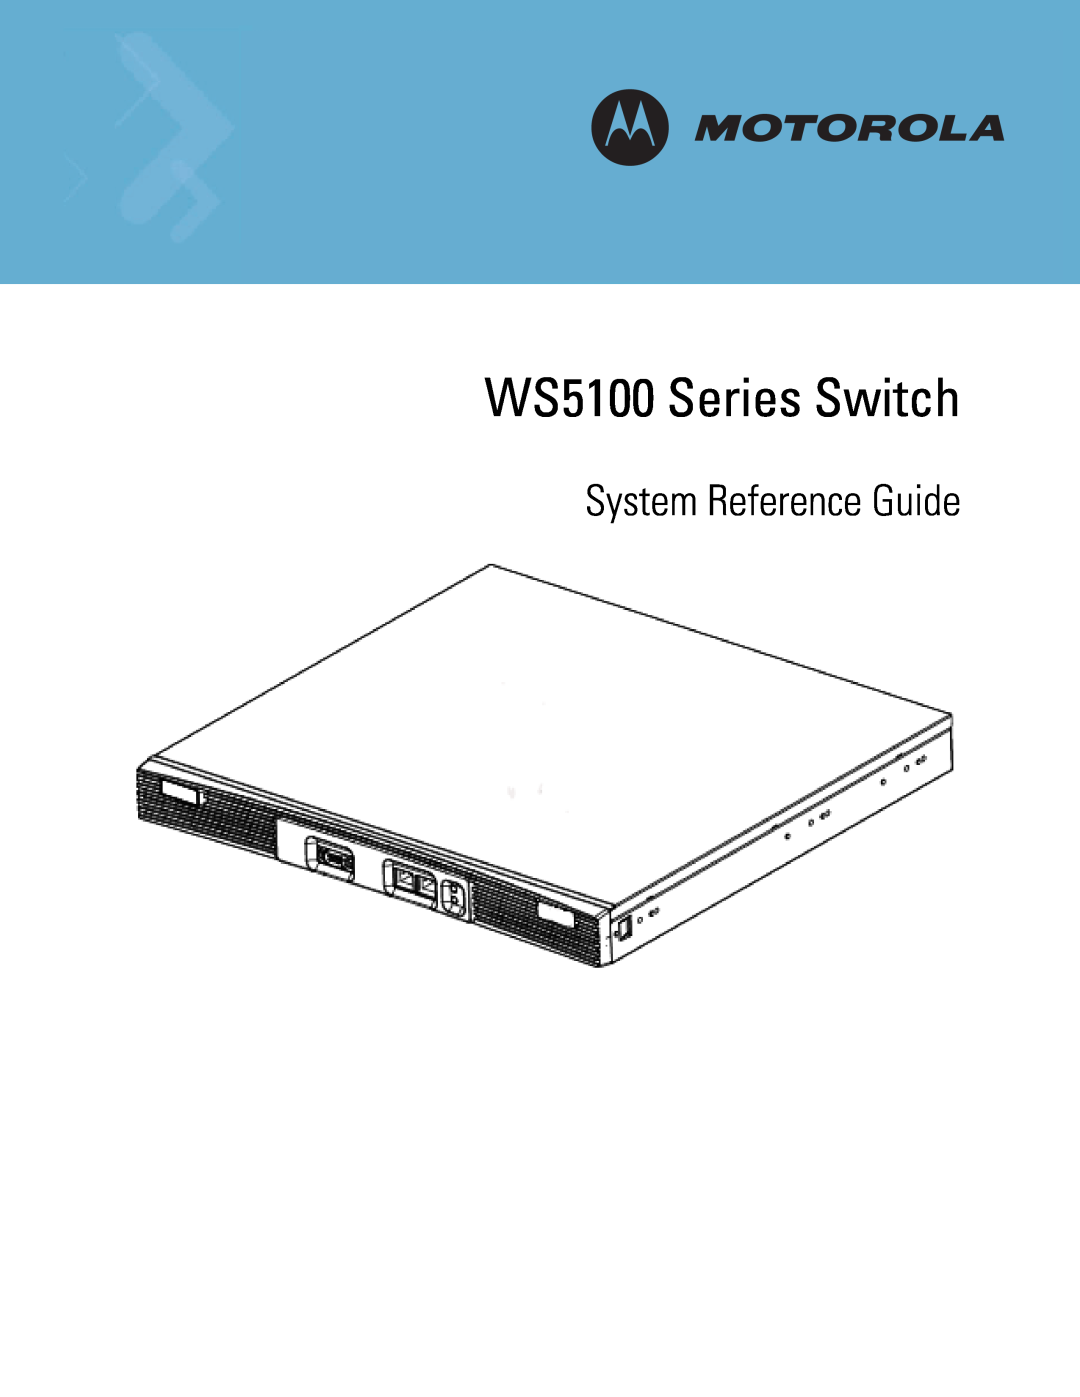 Motorola manual WS5100 Series Switch, System Reference Guide 